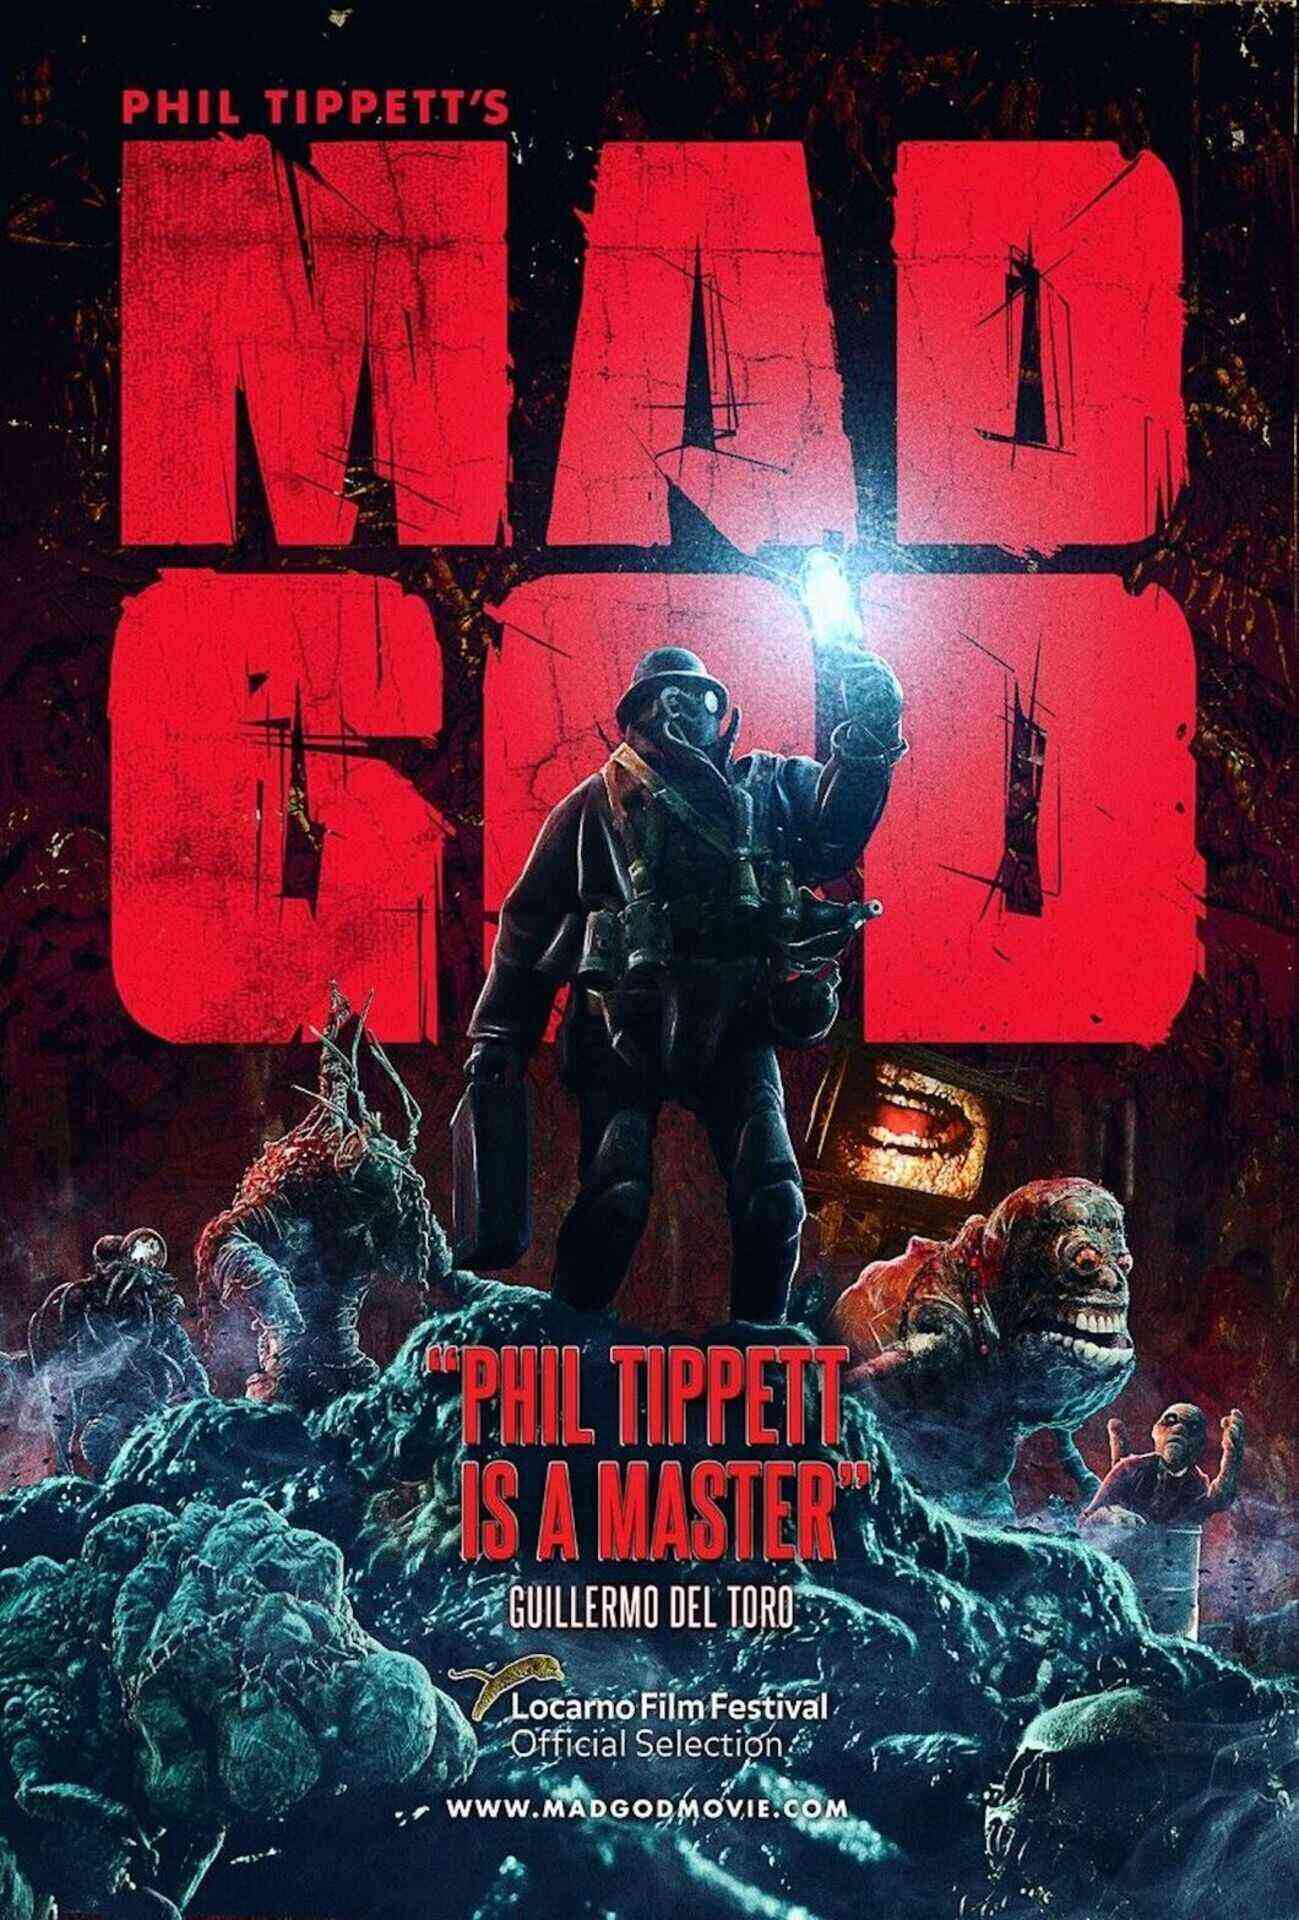 Theatrical poster for Mad God, directed by Phil Tippett.